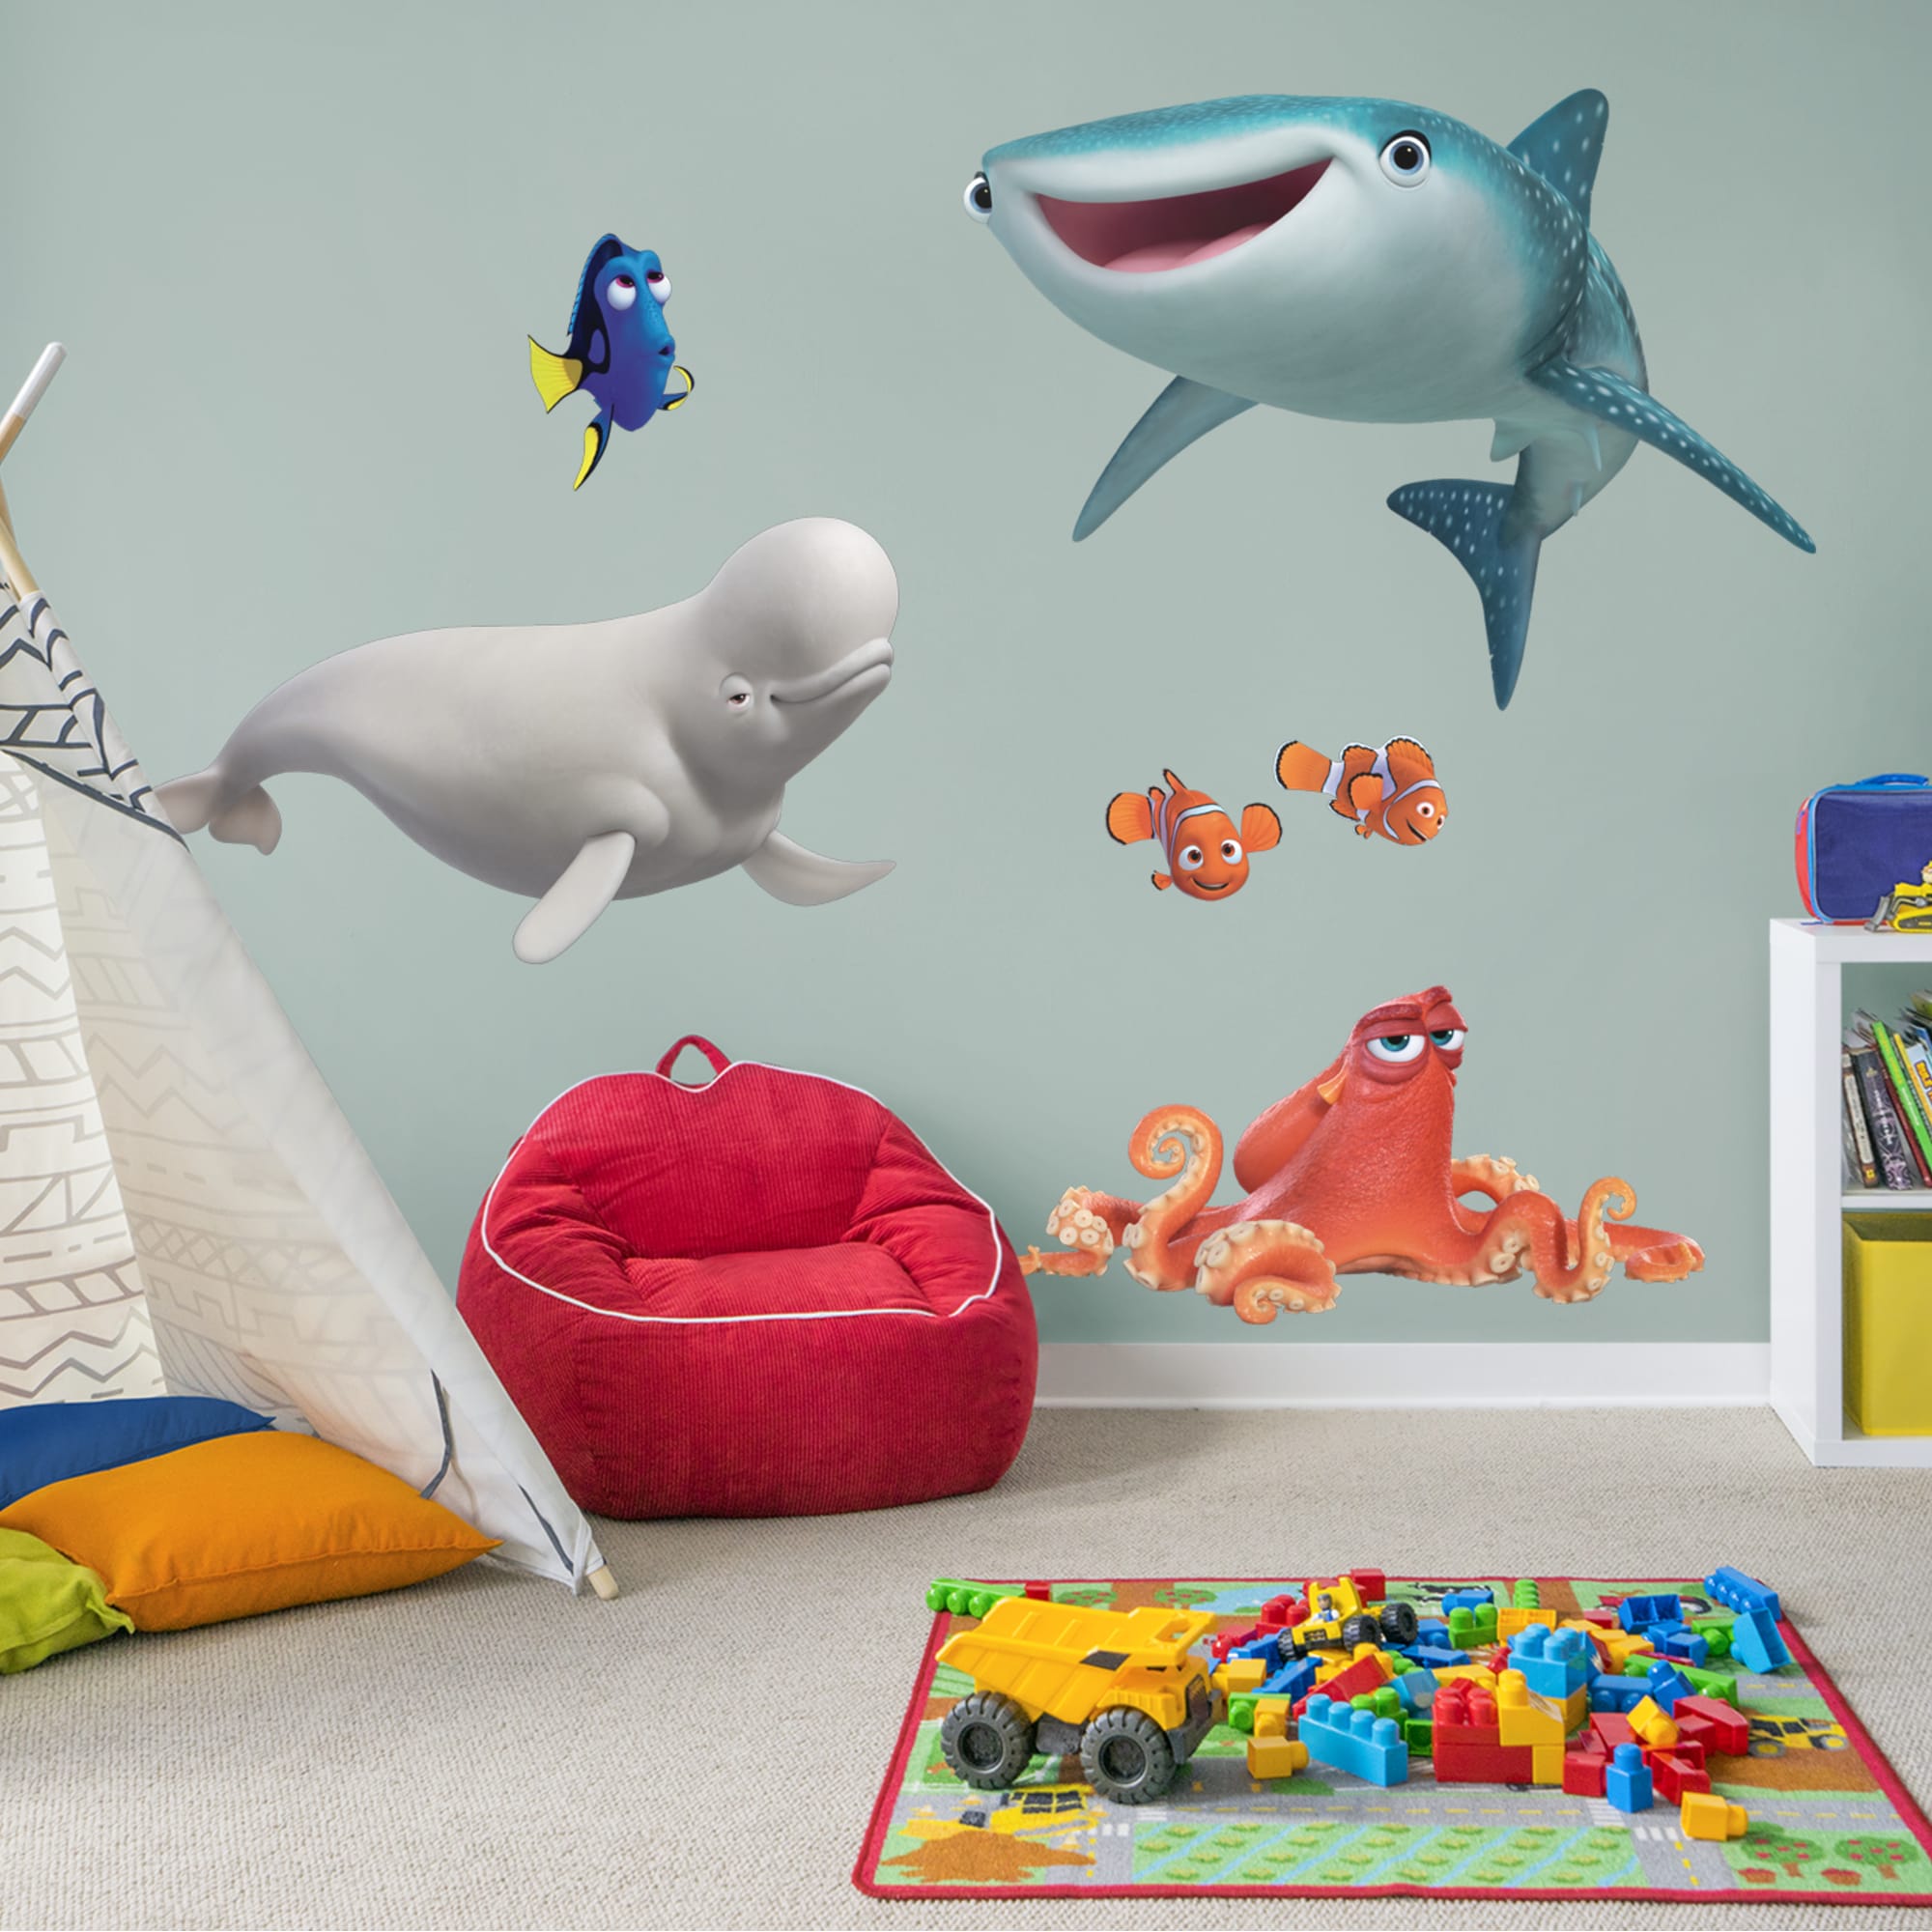 Finding Dory: Collection - Officially Licensed Disney/PIXAR Removable Wall Decals 59.0"W x 72.0"H by Fathead | Vinyl